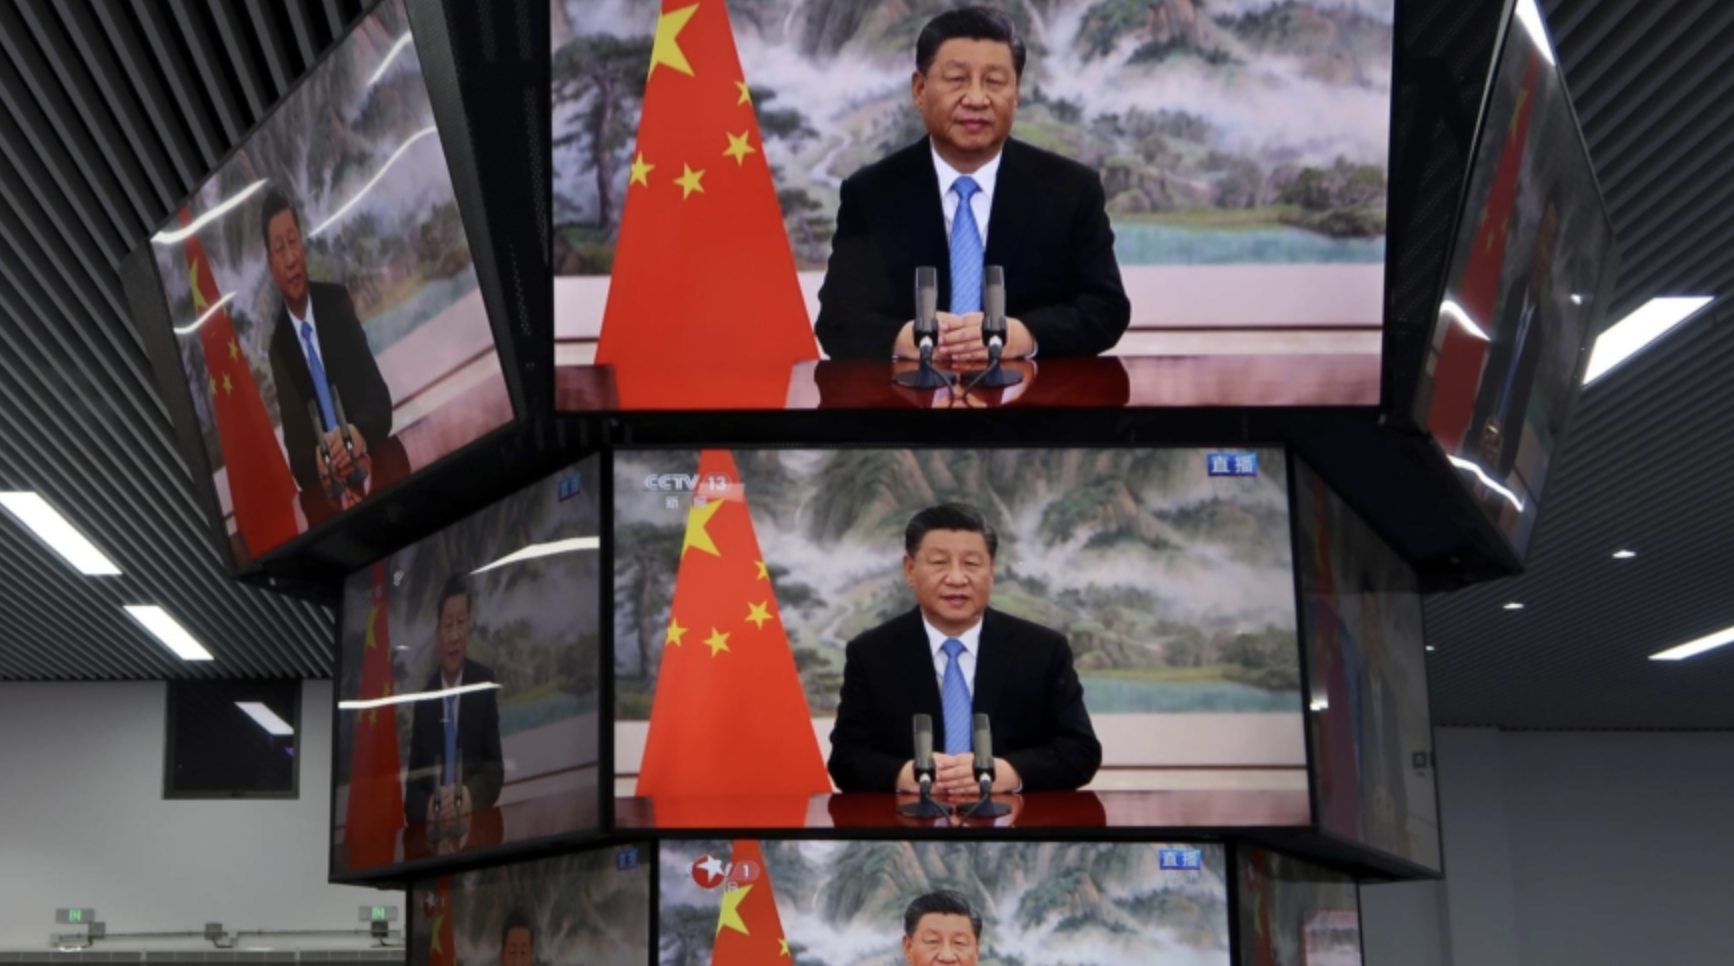 China & Our Media